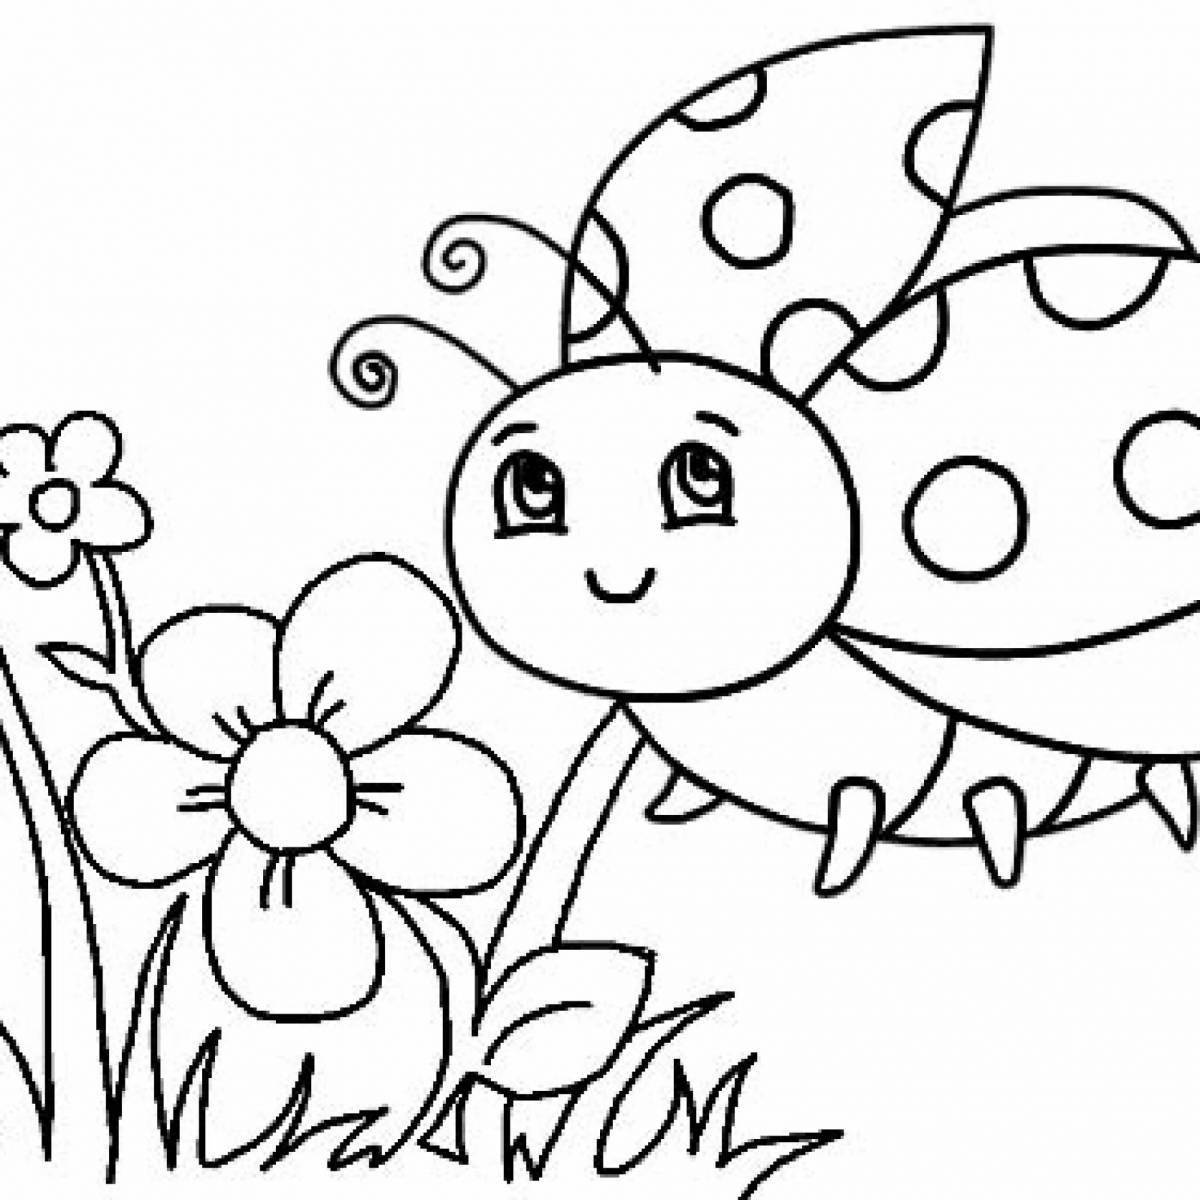 Ladybug Beetle and Flowers Coloring Page